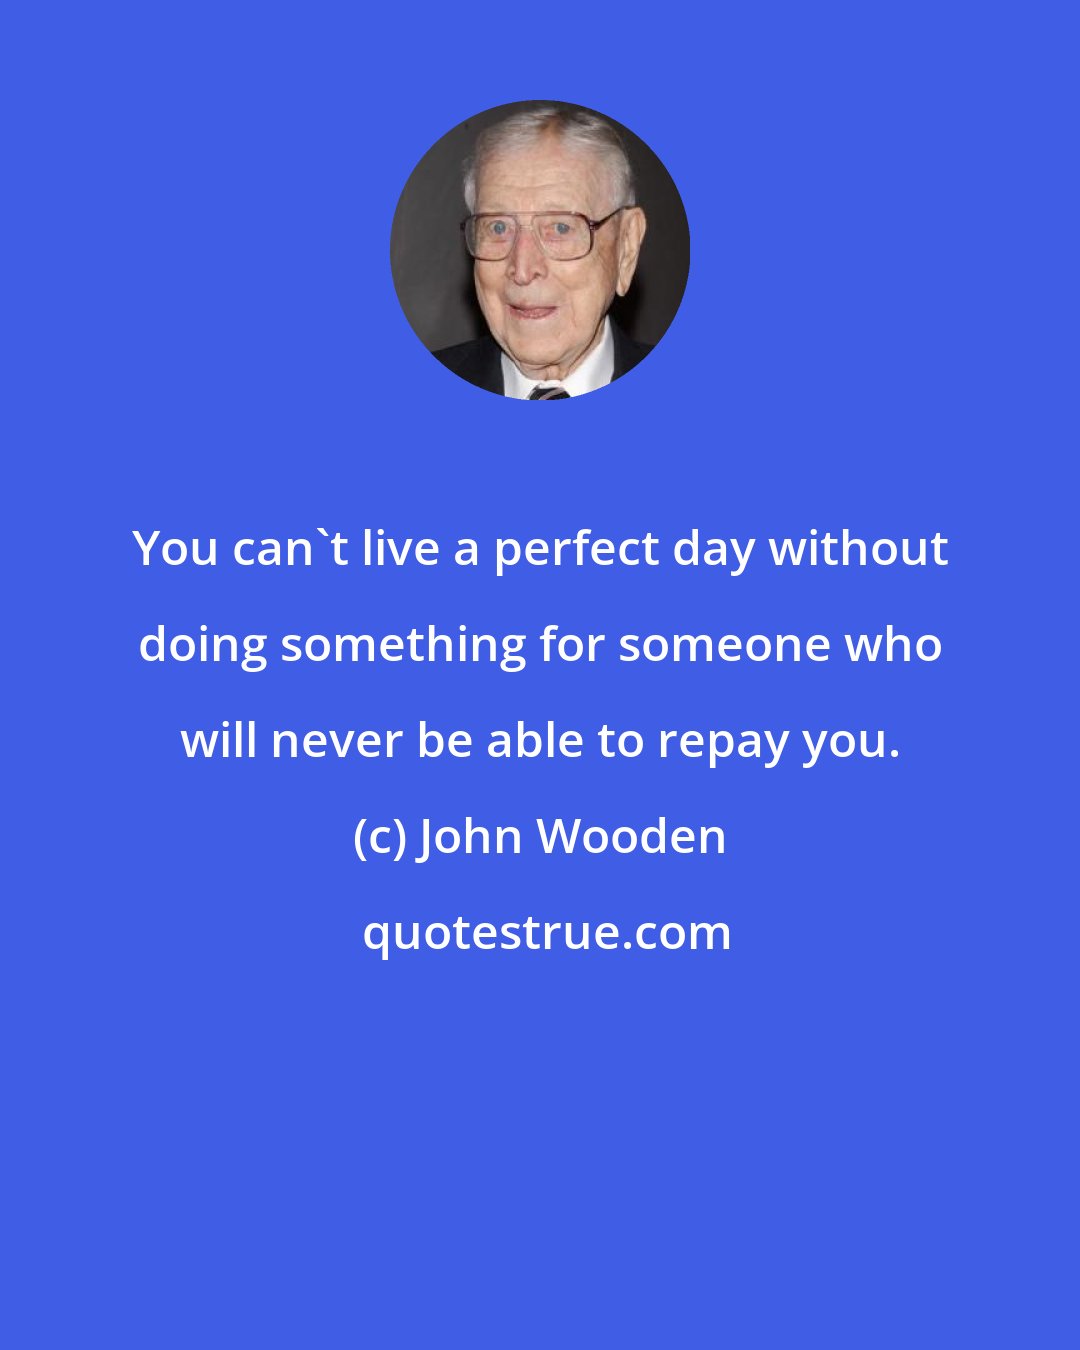 John Wooden: You can't live a perfect day without doing something for someone who will never be able to repay you.